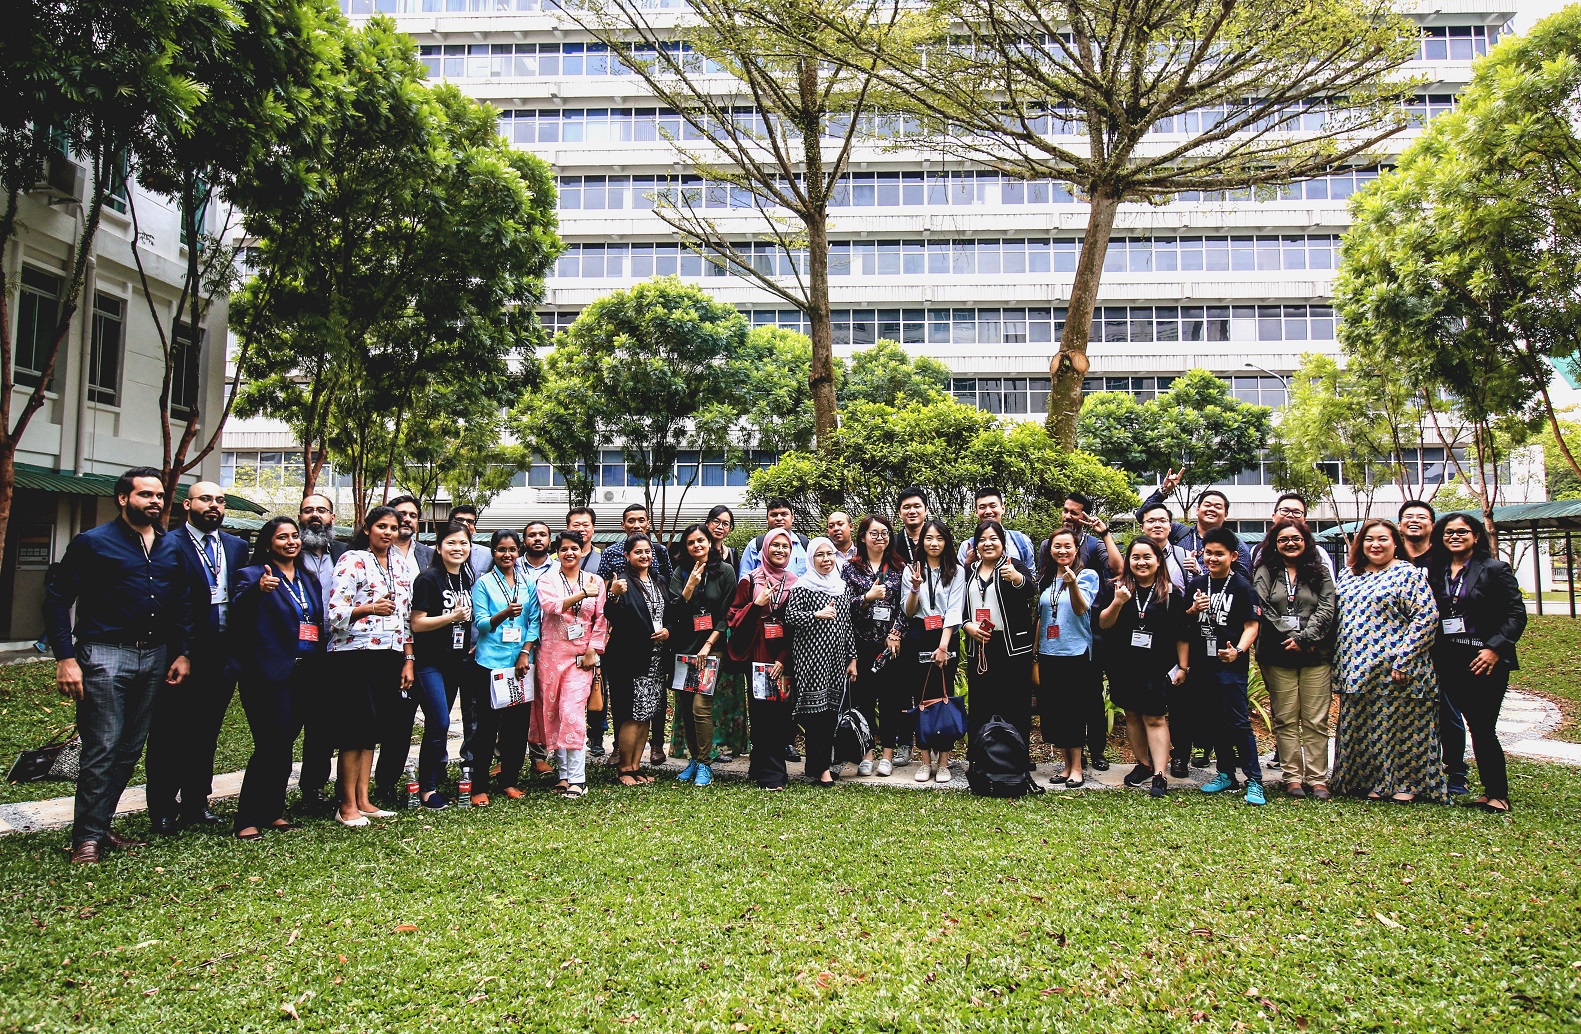 Group photo of the partners and Swinburne staff.